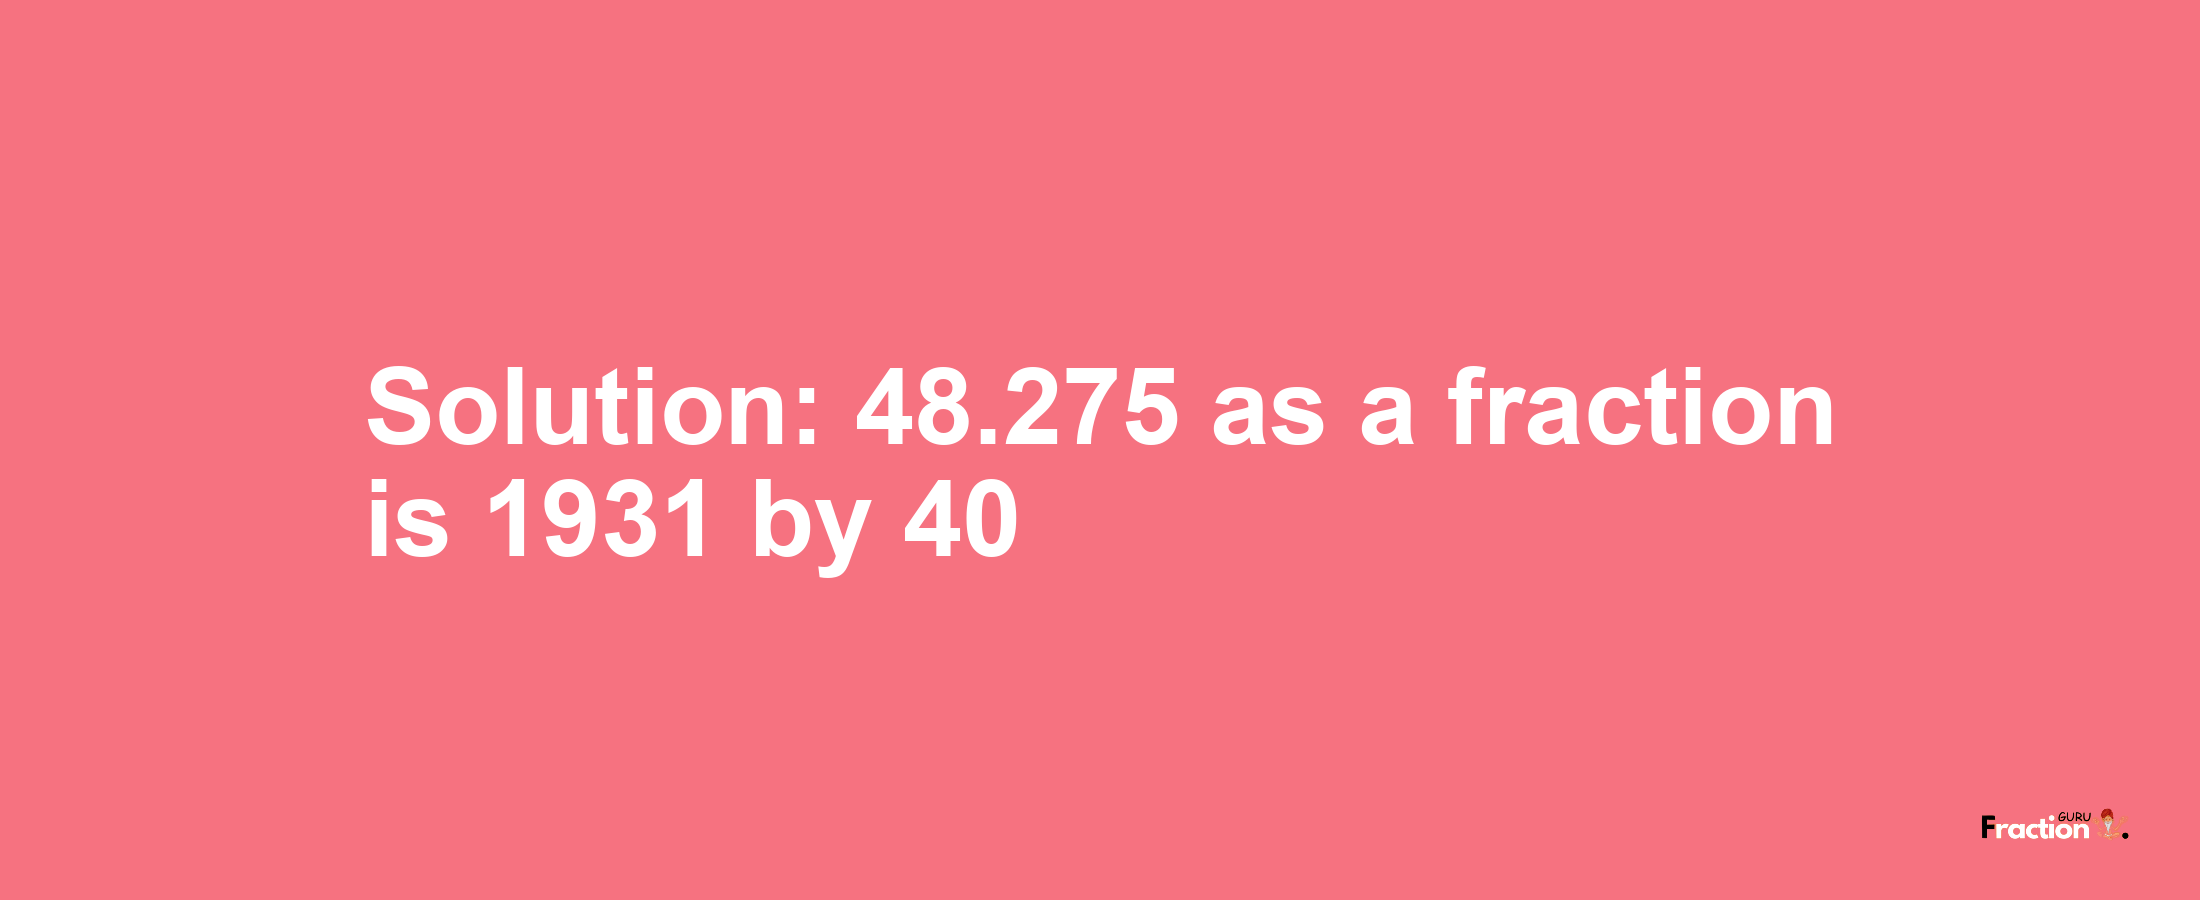 Solution:48.275 as a fraction is 1931/40